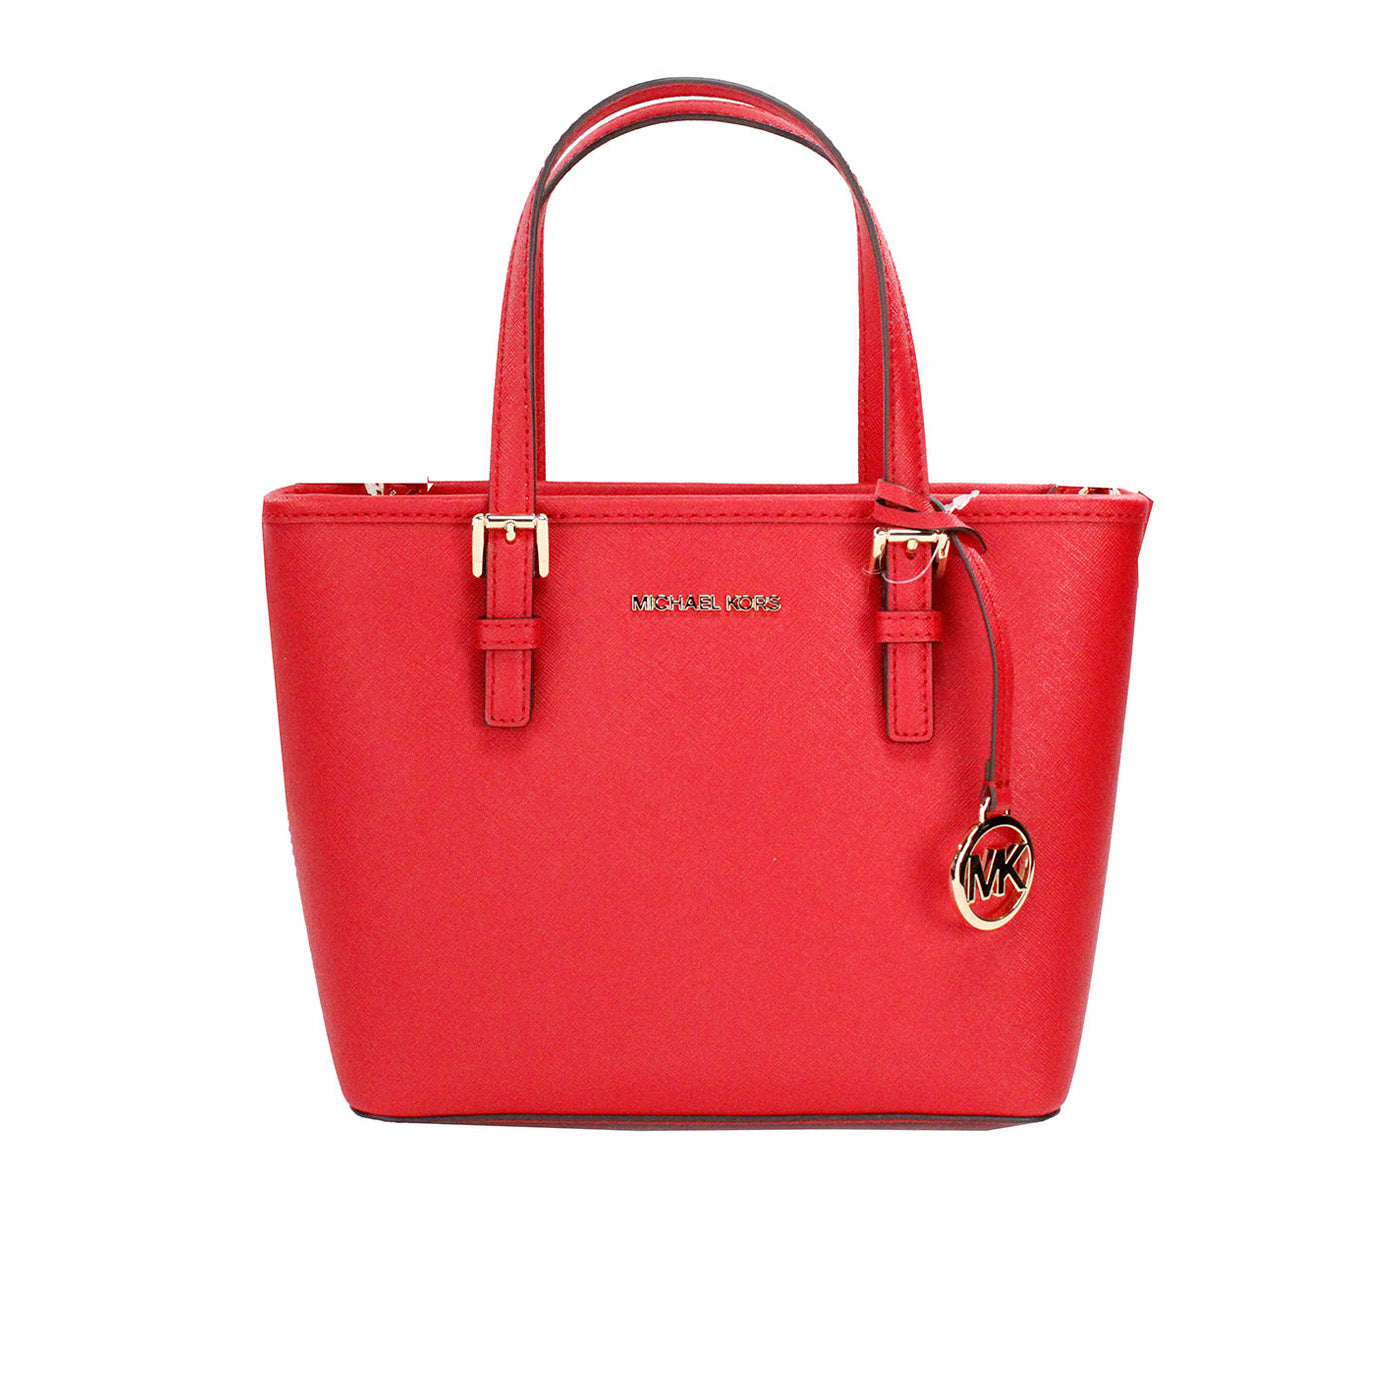 Jet Set Bright Red Leather XS Carryall Top Zip Tote Bag Purse - Divitiae Glamour